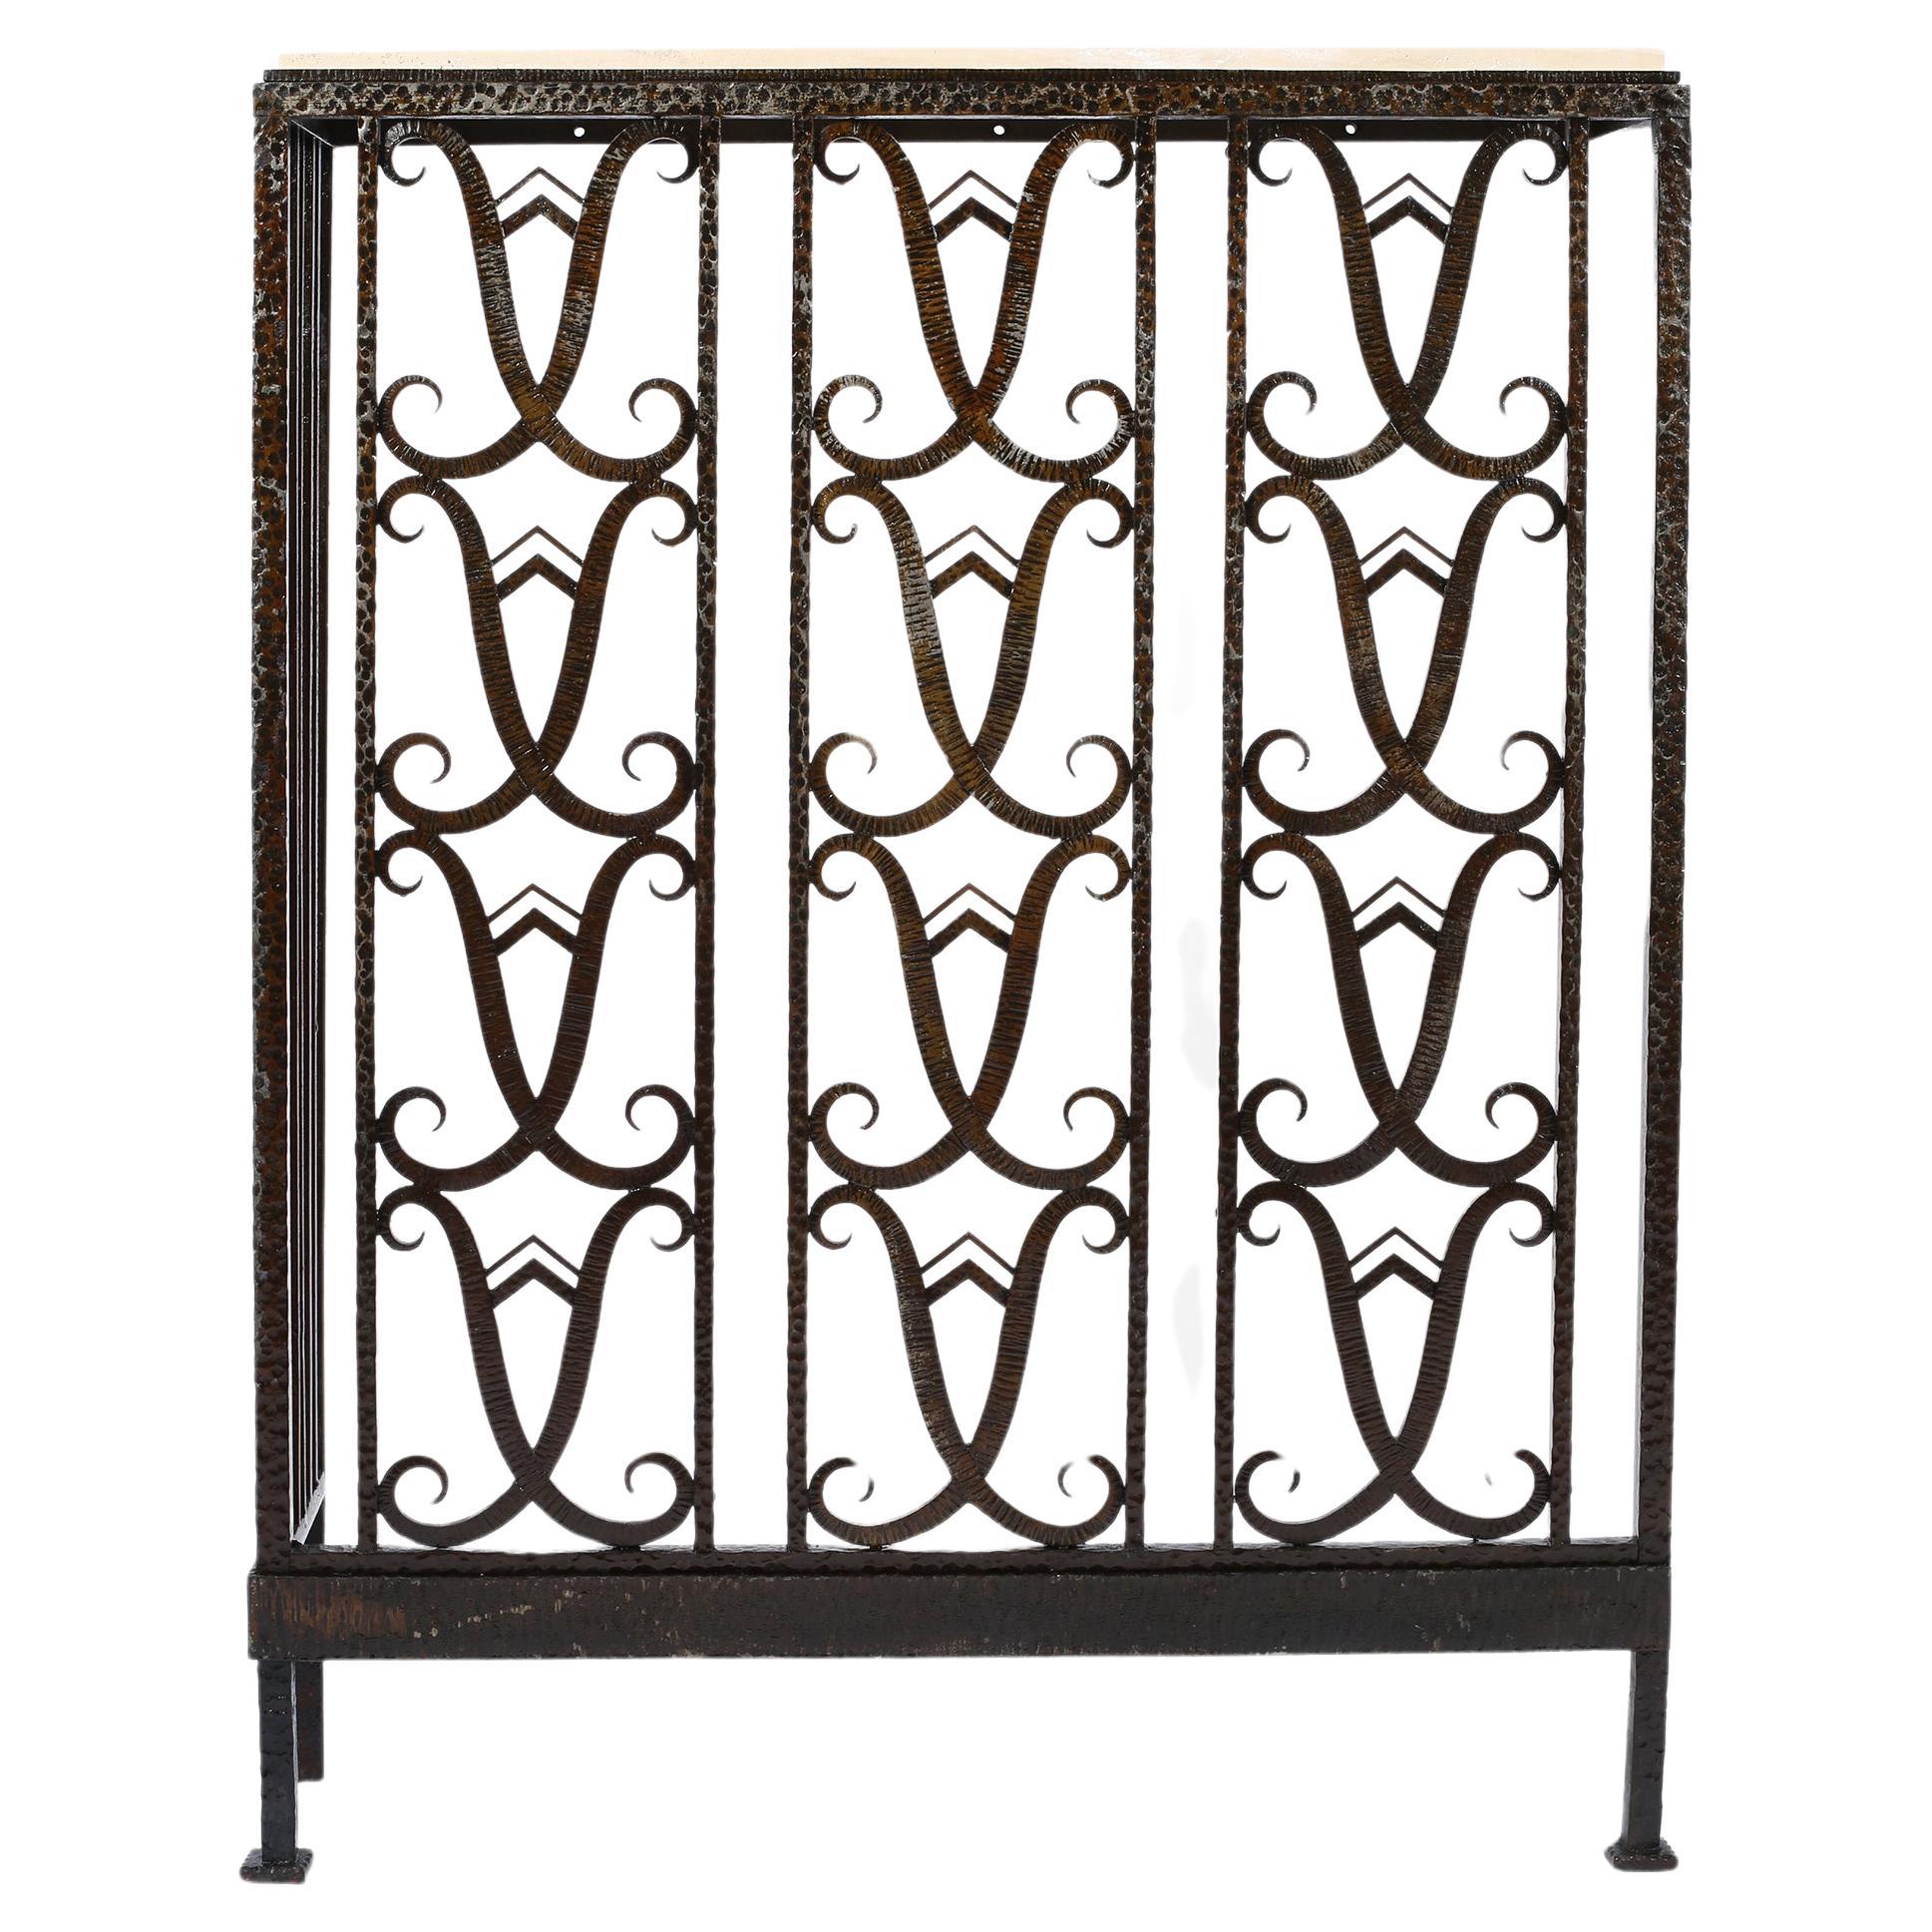 French Art Deco Forged Iron and Limestone Corner Console Table Radiator Cover For Sale